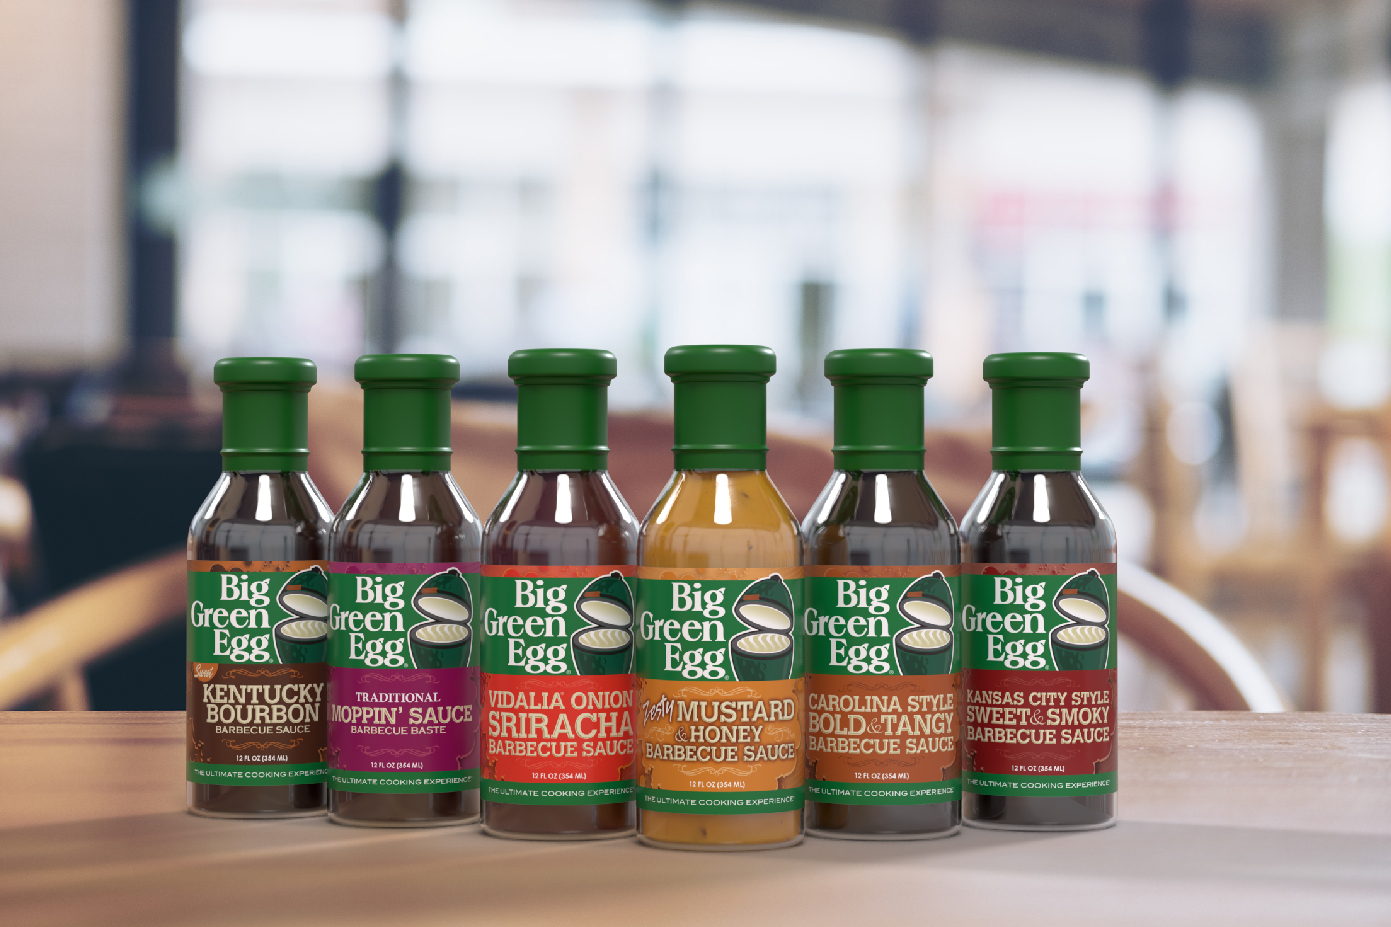 https://www.monroefireplace.com/wp-content/uploads/2021/10/Barbecue-sauces-on-table-1391x927-1.jpg